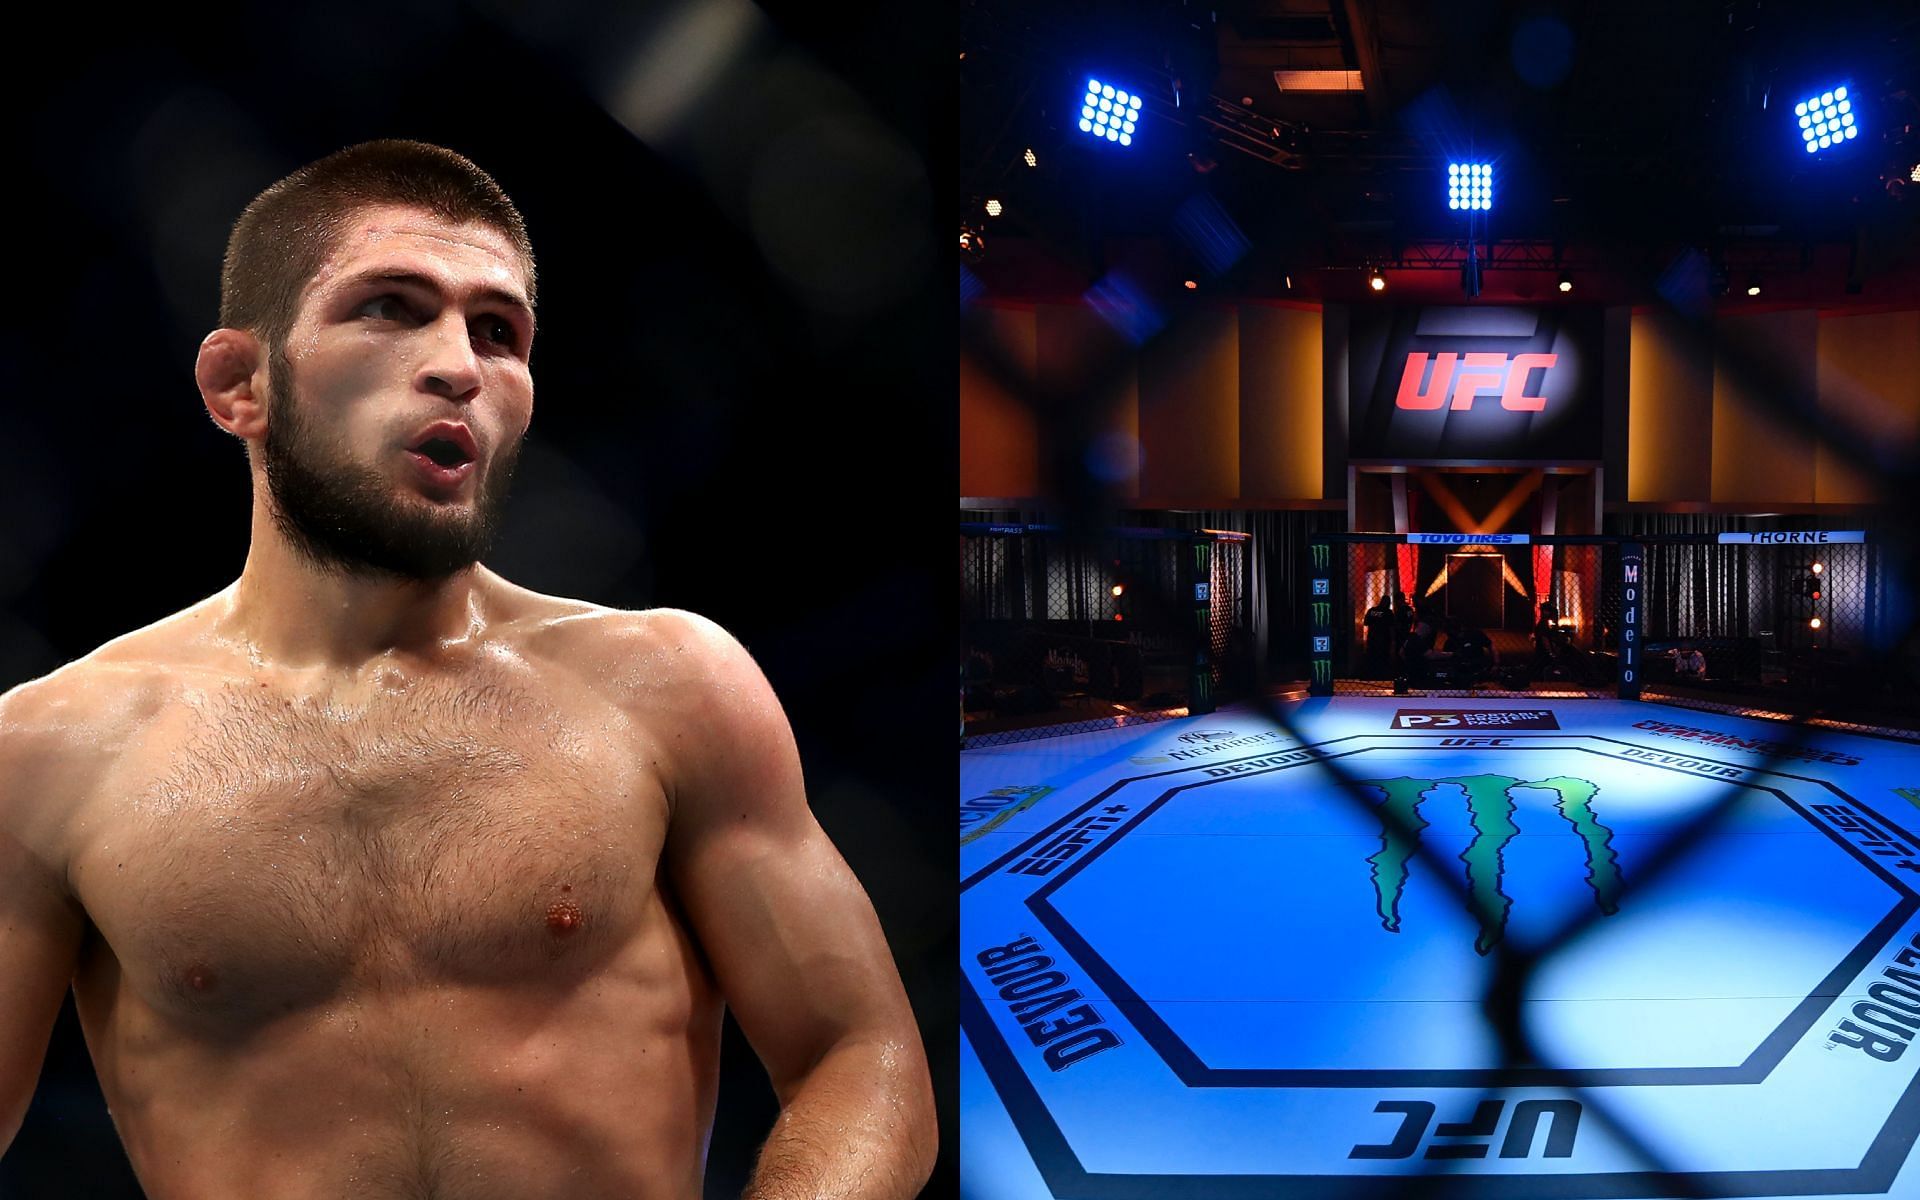 Khabib Nurmagomedov (left) and the UFC Octagon (right) [Image Courtesy: Getty Images]